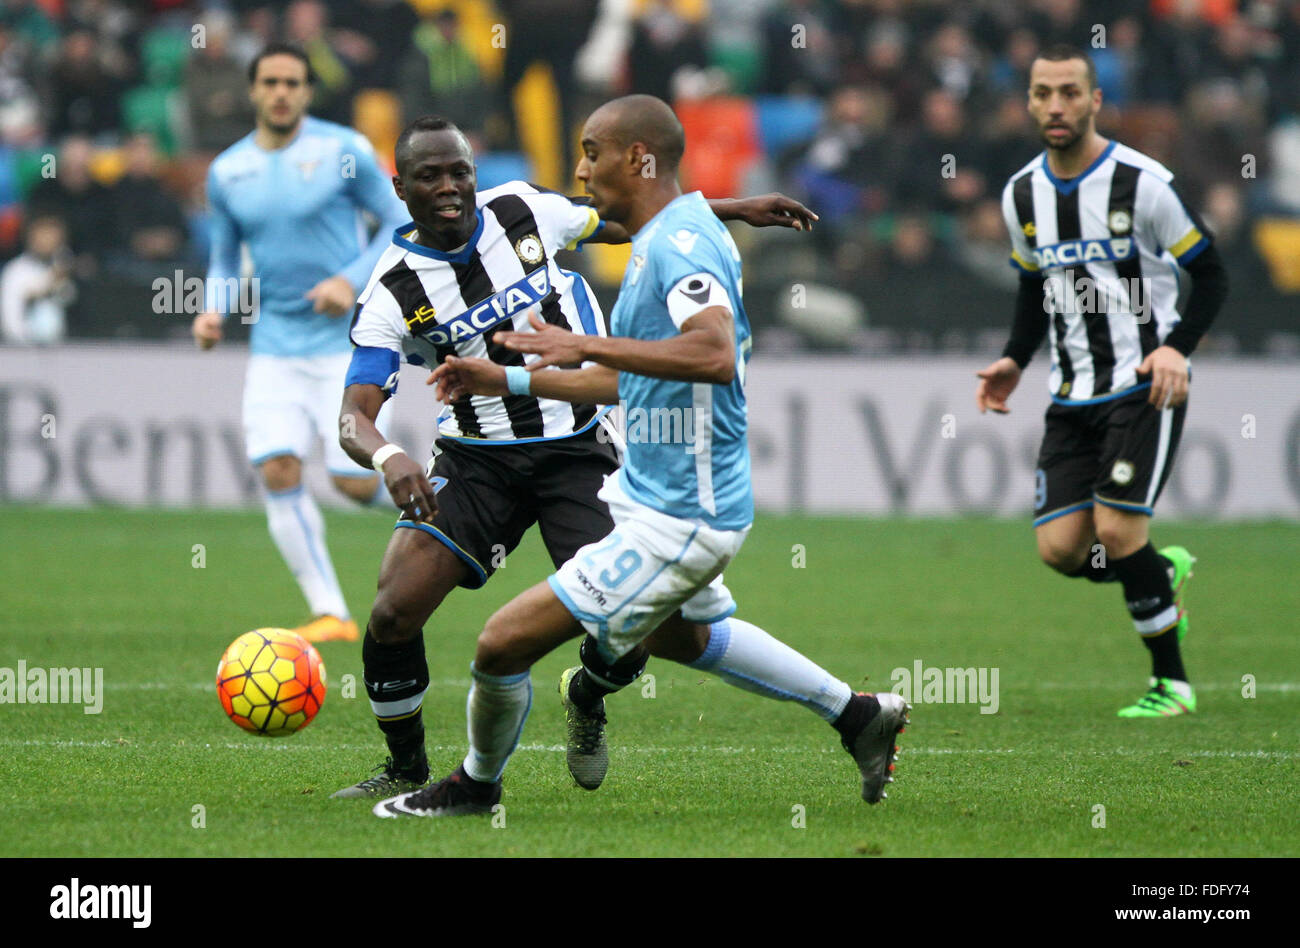 Udine, Italy. 31st January, 2016. Udinese's midfielder Emmanuel Agyemang Badu (L) Lazio's defender Abdoulay Konko fights for the ball during the Italian Serie A football match between Udinese Calcio v SS Lazio. Credit:  Andrea Spinelli/Pacific Press/Alamy Live News Stock Photo